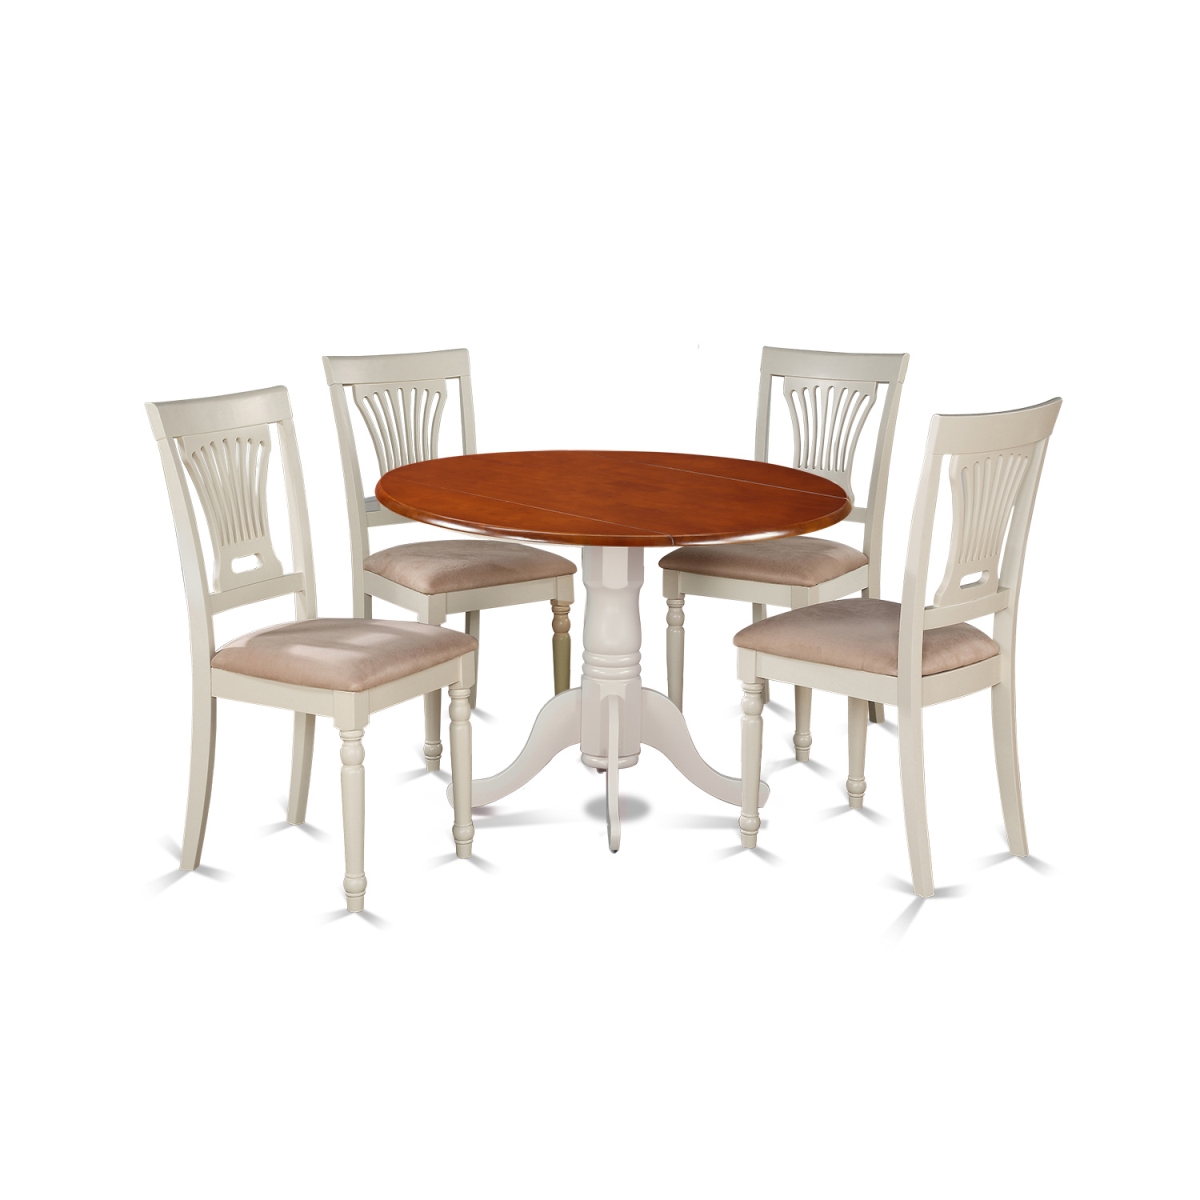 Picture of East West Furniture DLPL5-BMK-C Dublin Kitchen Table Set - Dining Table & 4 Wooden Chairs, Buttermilk & Cherry - 5 Piece